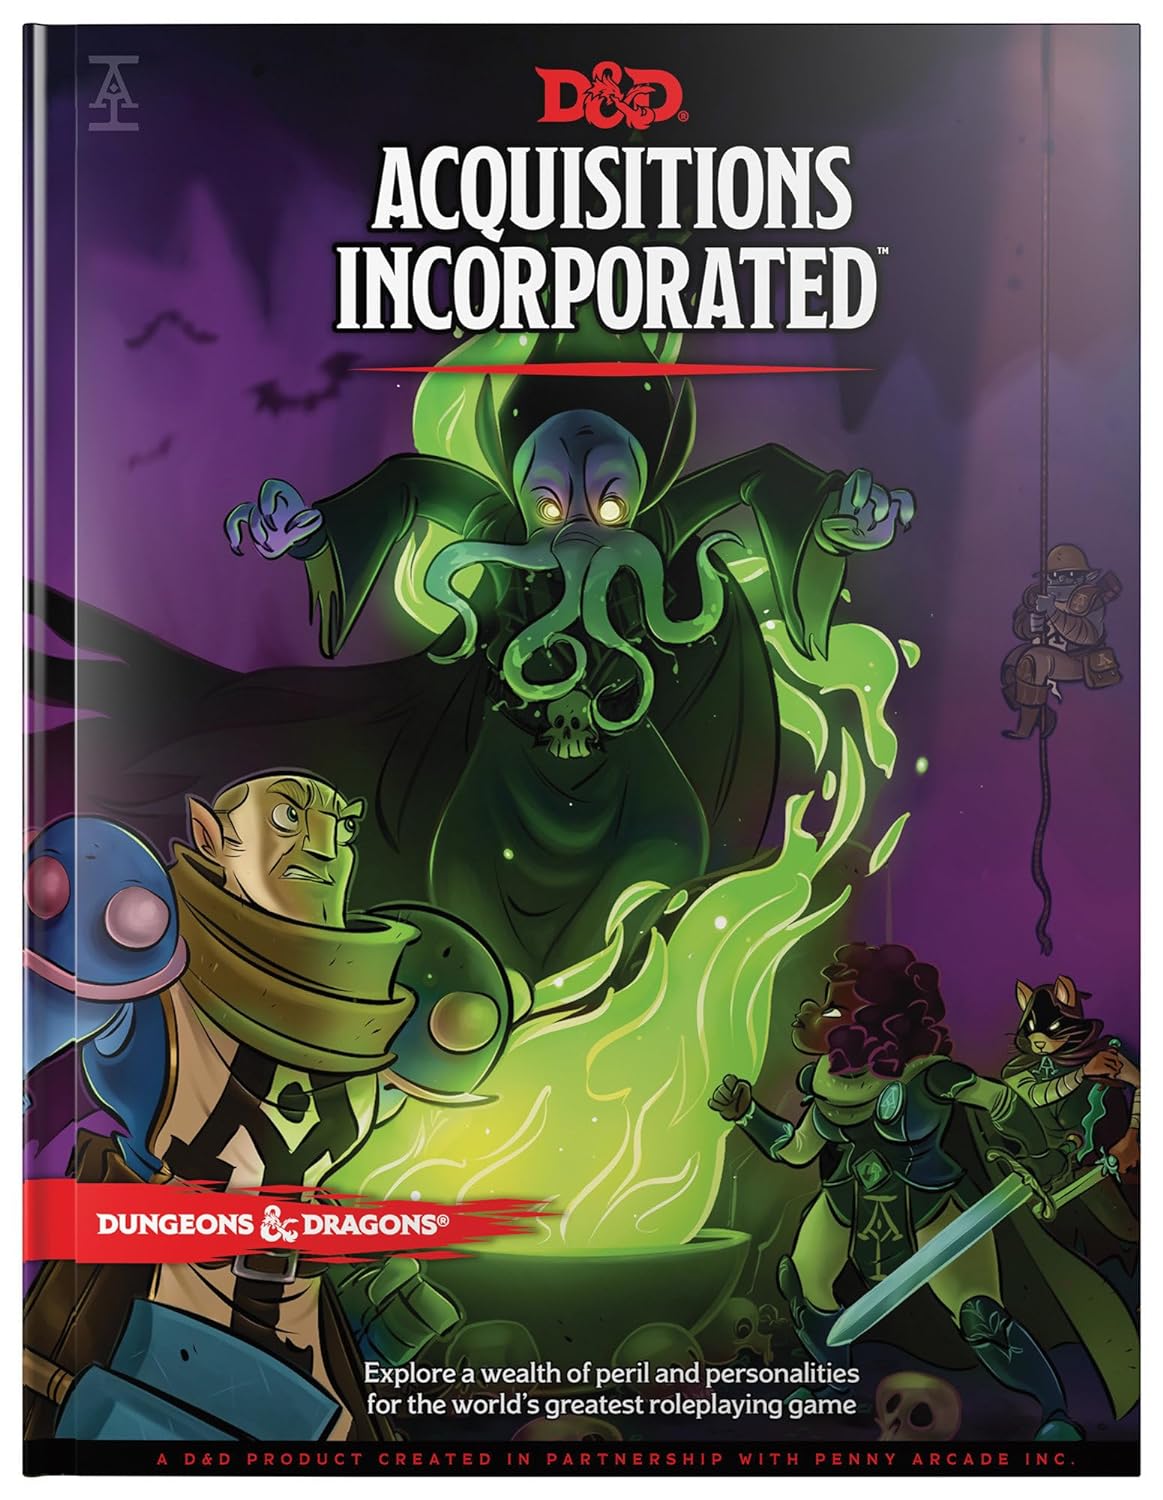 D&D: Acquisitions Incorporated (book)